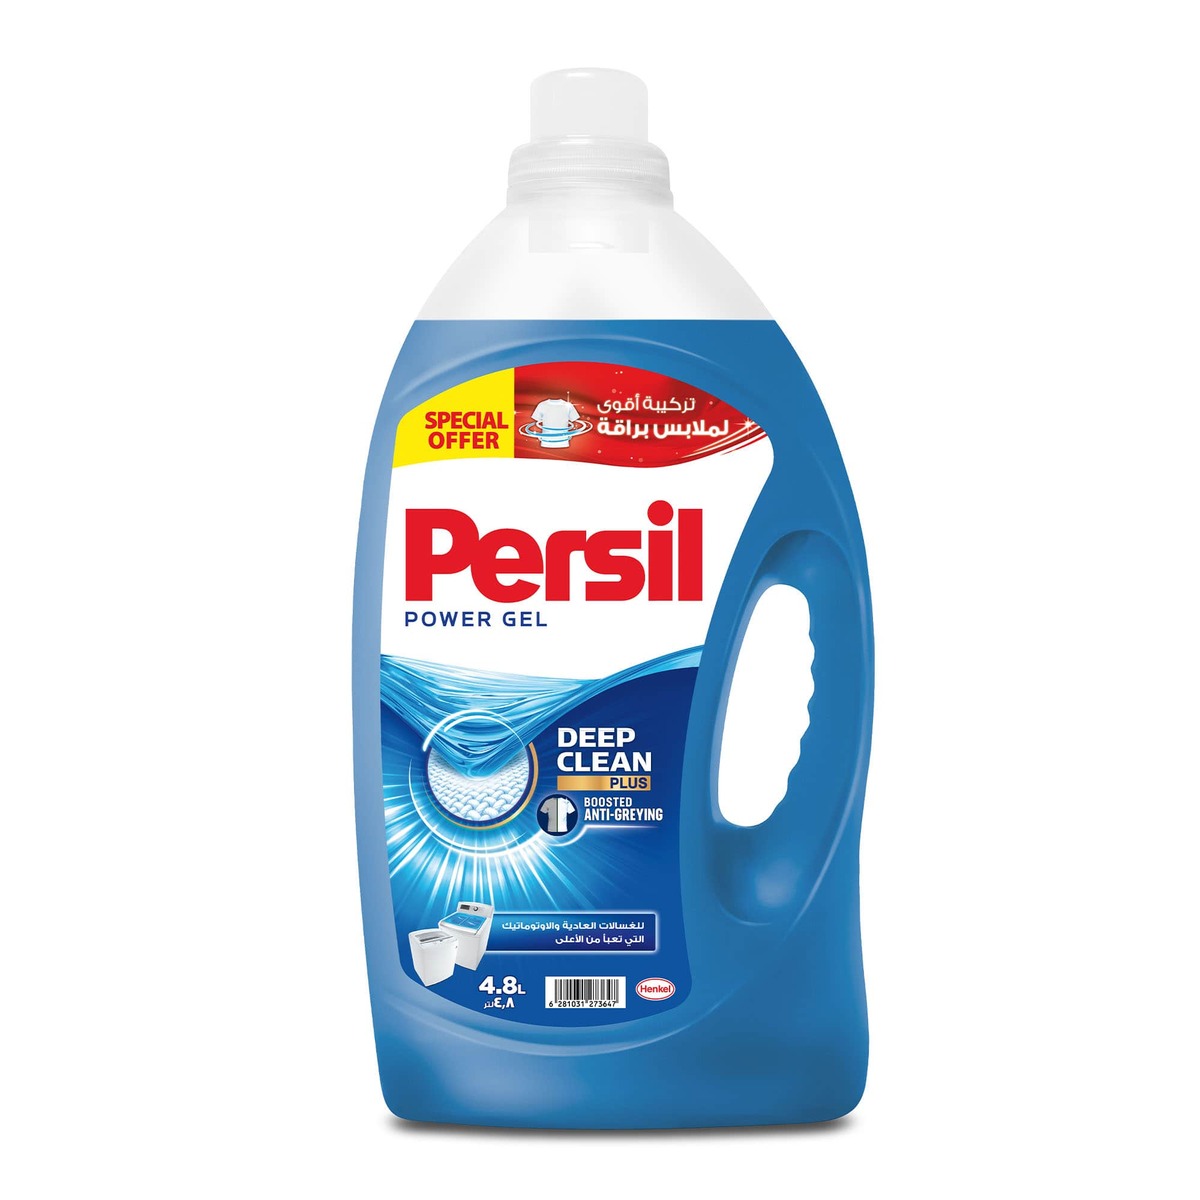 Persil Power Gel Liquid Laundry Detergent For Top Loading Washing Machines Value Pack 4.8 Litres